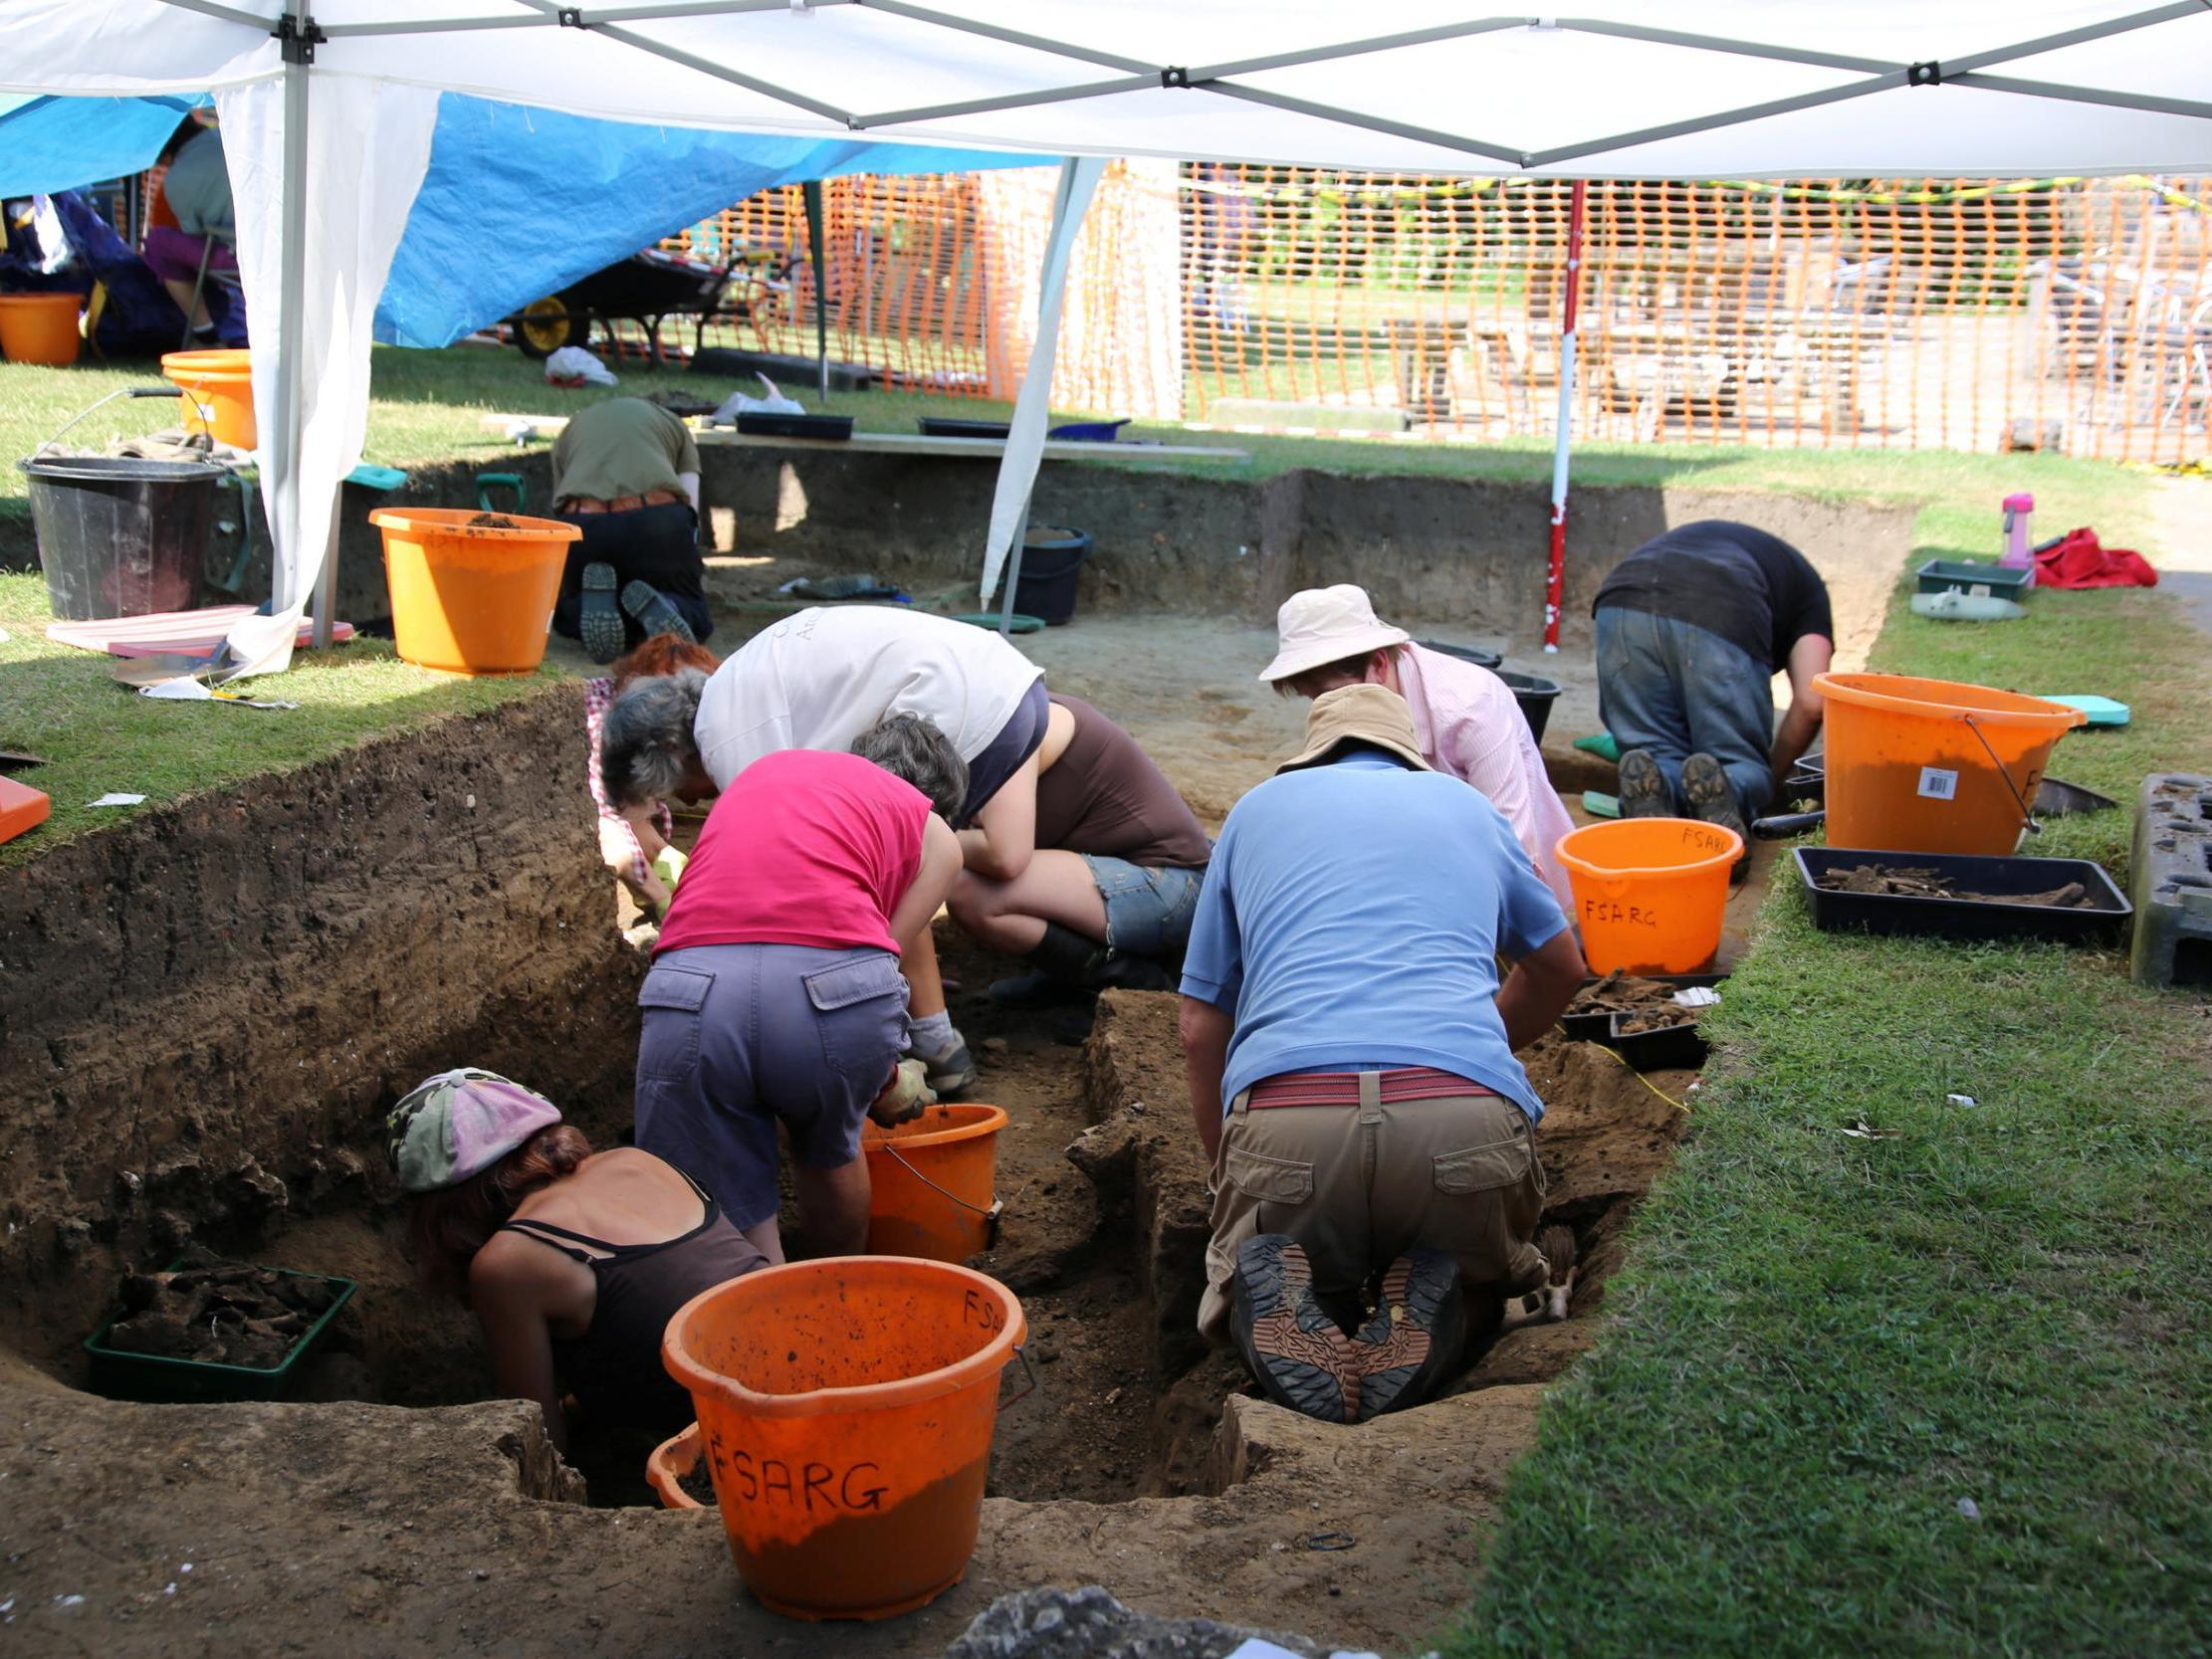 Archaeologists landed in a Kent beer garden after 15 years of searching for an ancient royal manor